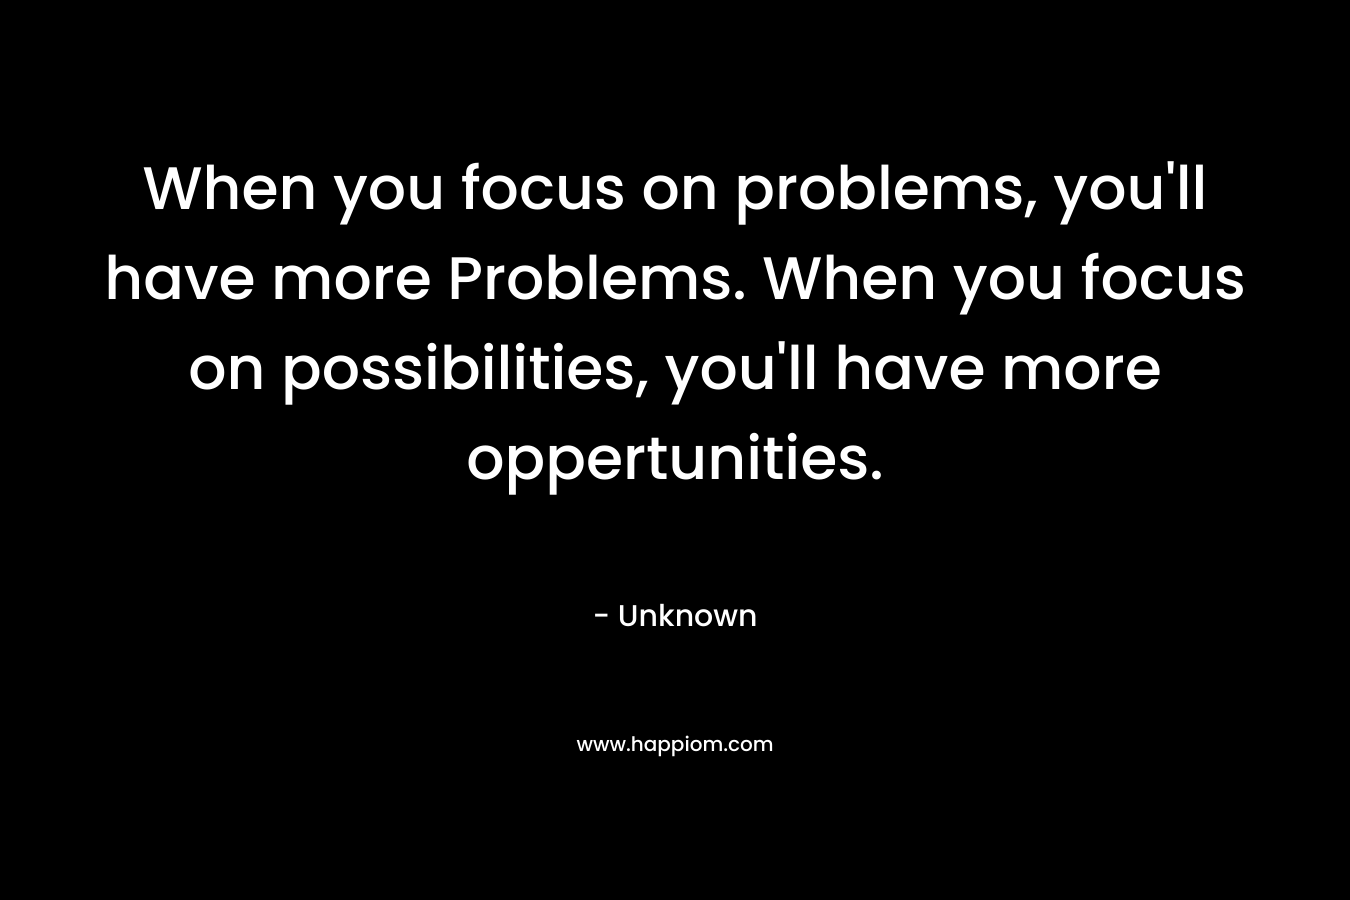 When you focus on problems, you'll have more Problems. When you focus on possibilities, you'll have more oppertunities.